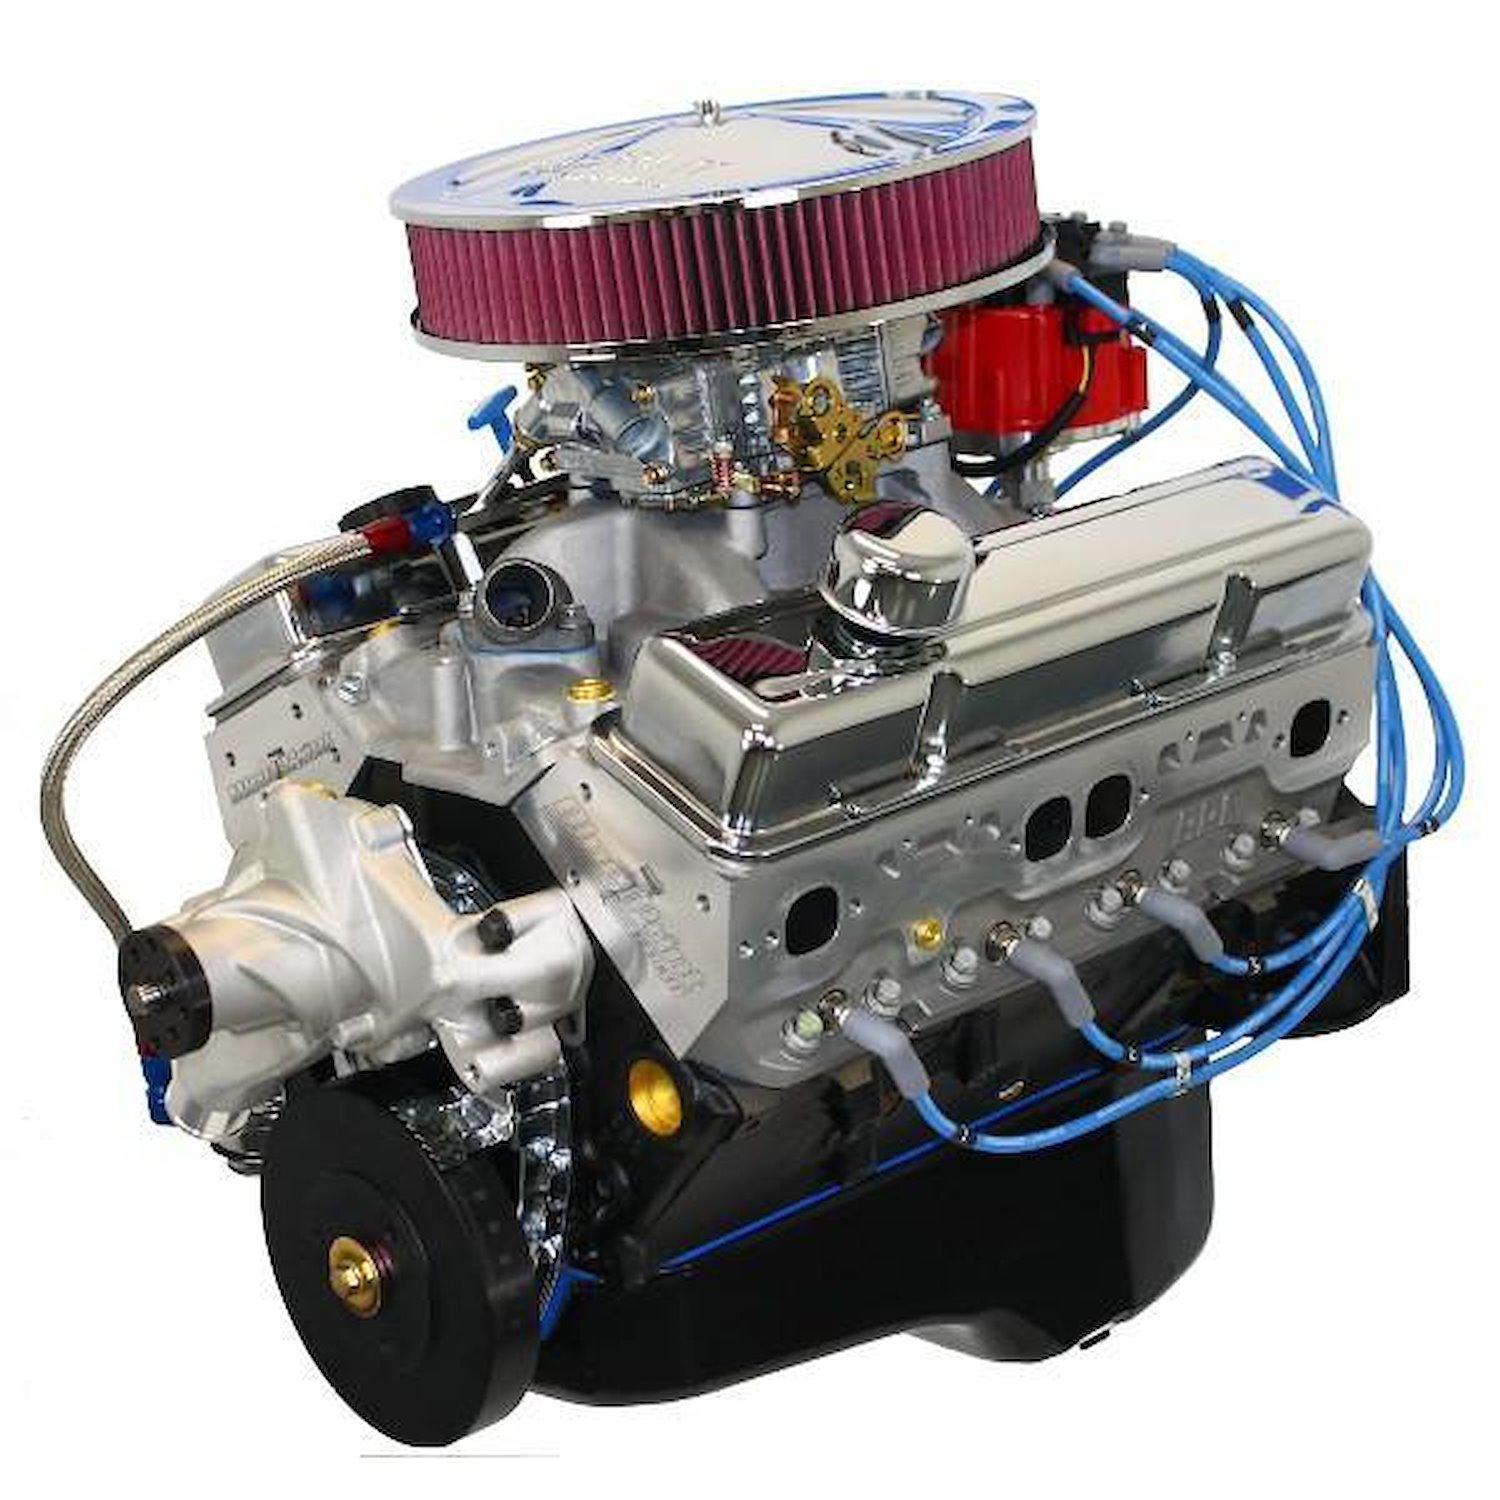 New Block Casting 350 ci Small Block Chevy Cruiser Crate Engine [Carbureted / Drop-In Ready]